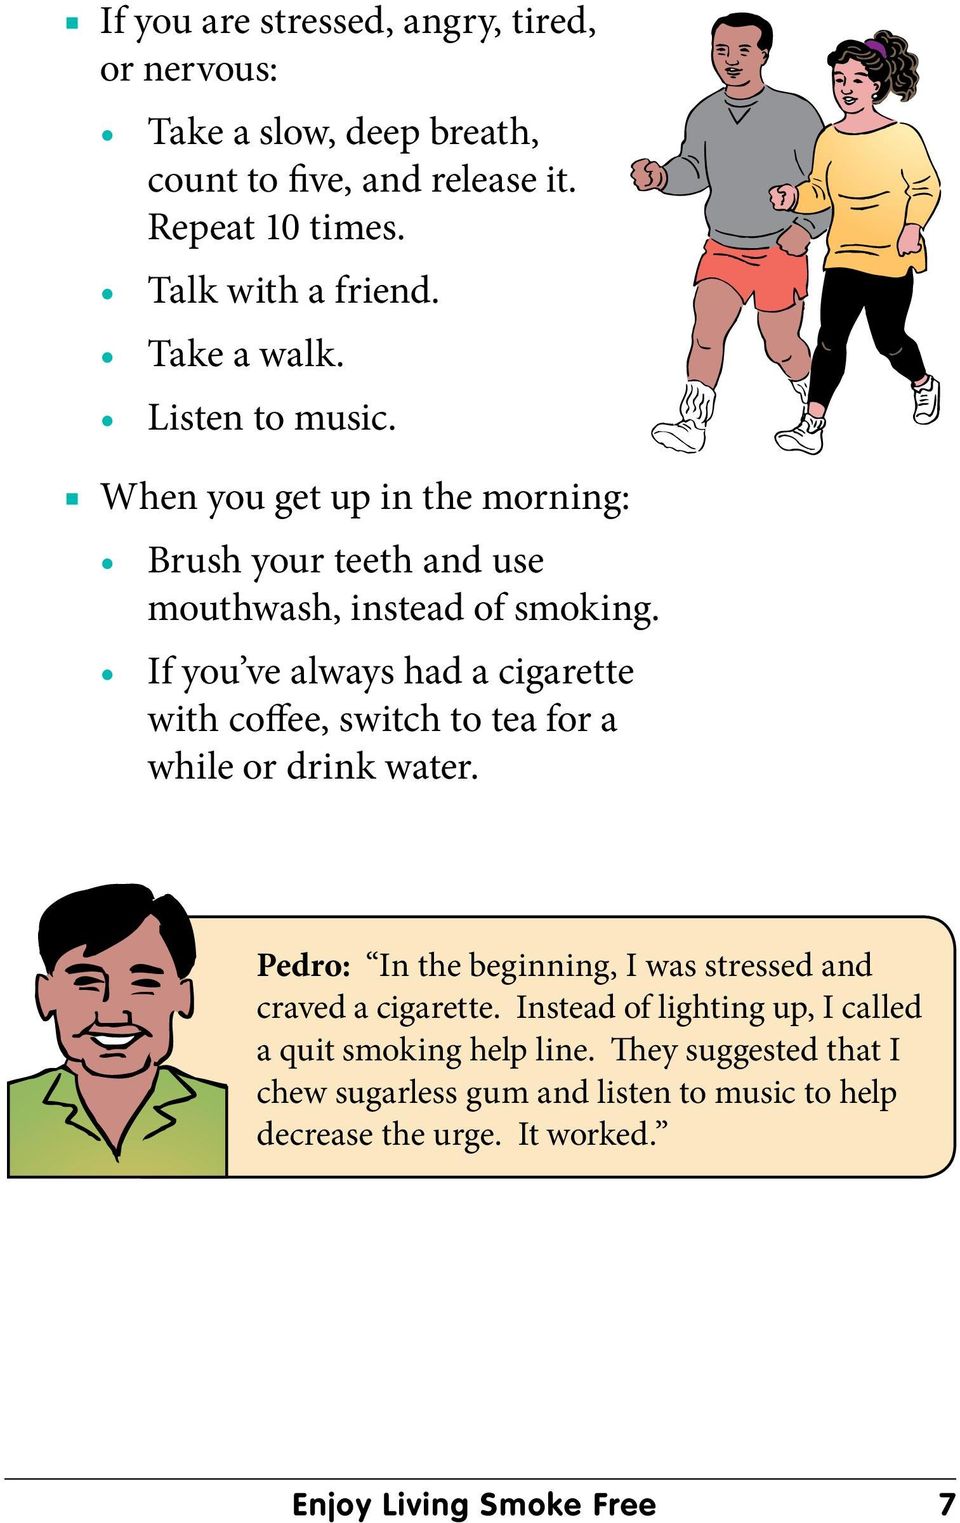 If you ve always had a cigarette with coffee, switch to tea for a while or drink water.